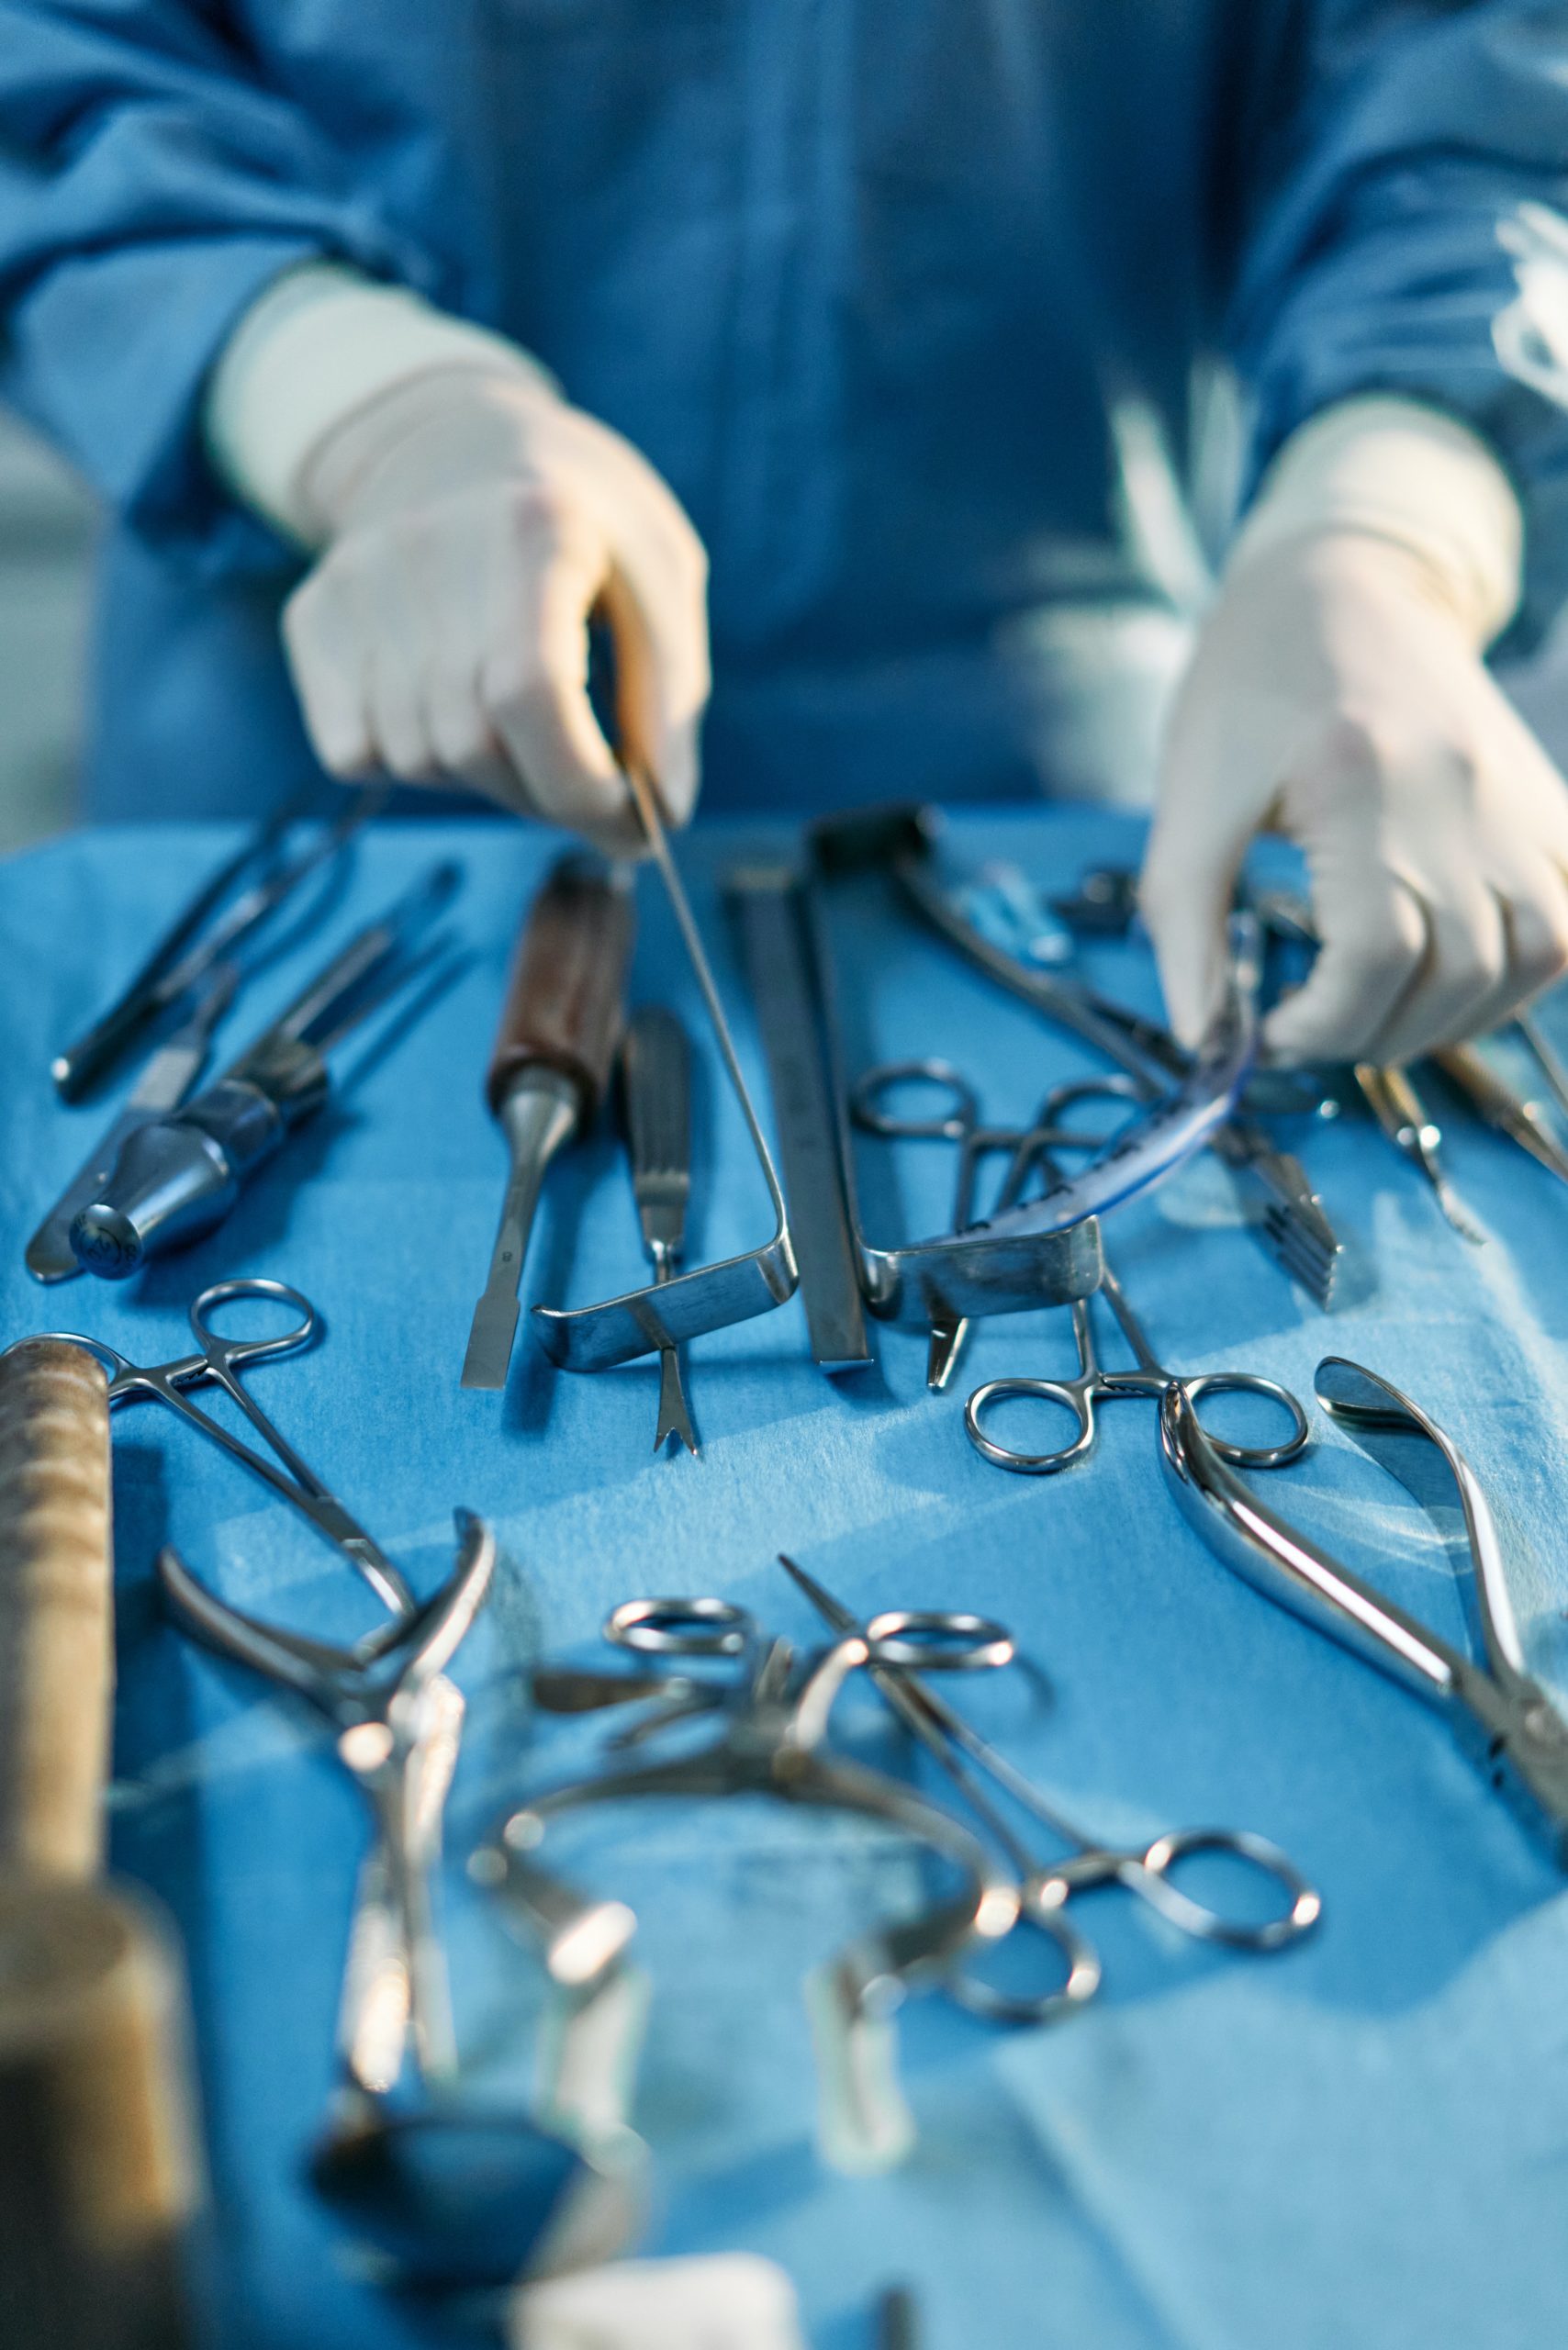 Surgical tools in an operating room setting.